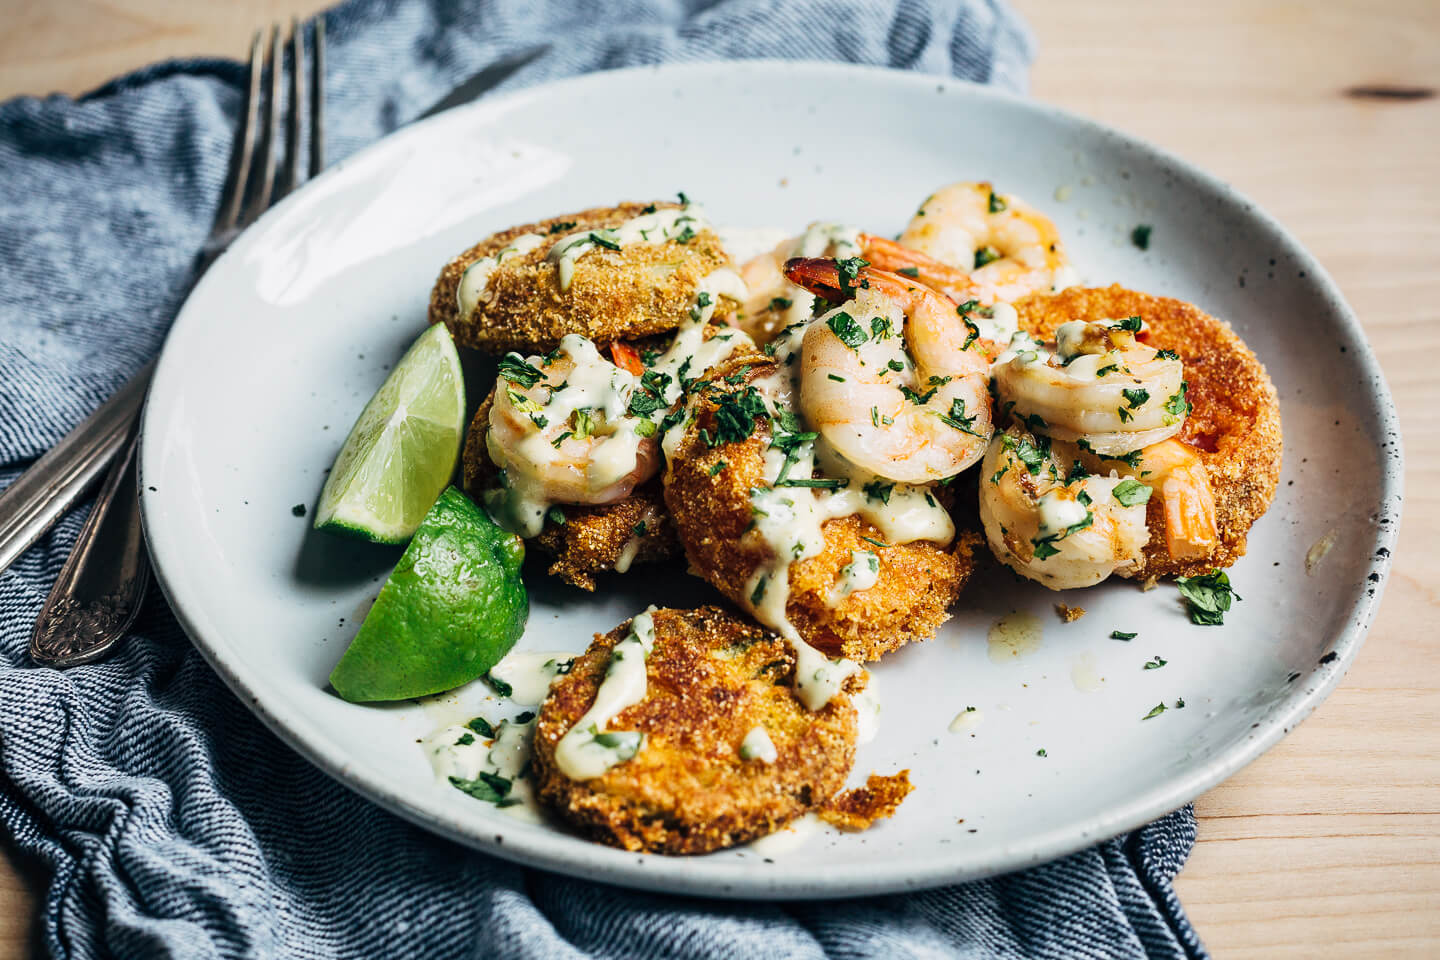 Putting leftover green tomatoes to good use with a recipe for crisp, savory fried green tomatoes topped with garlicky sautéed shrimp and a super simple remoulade.